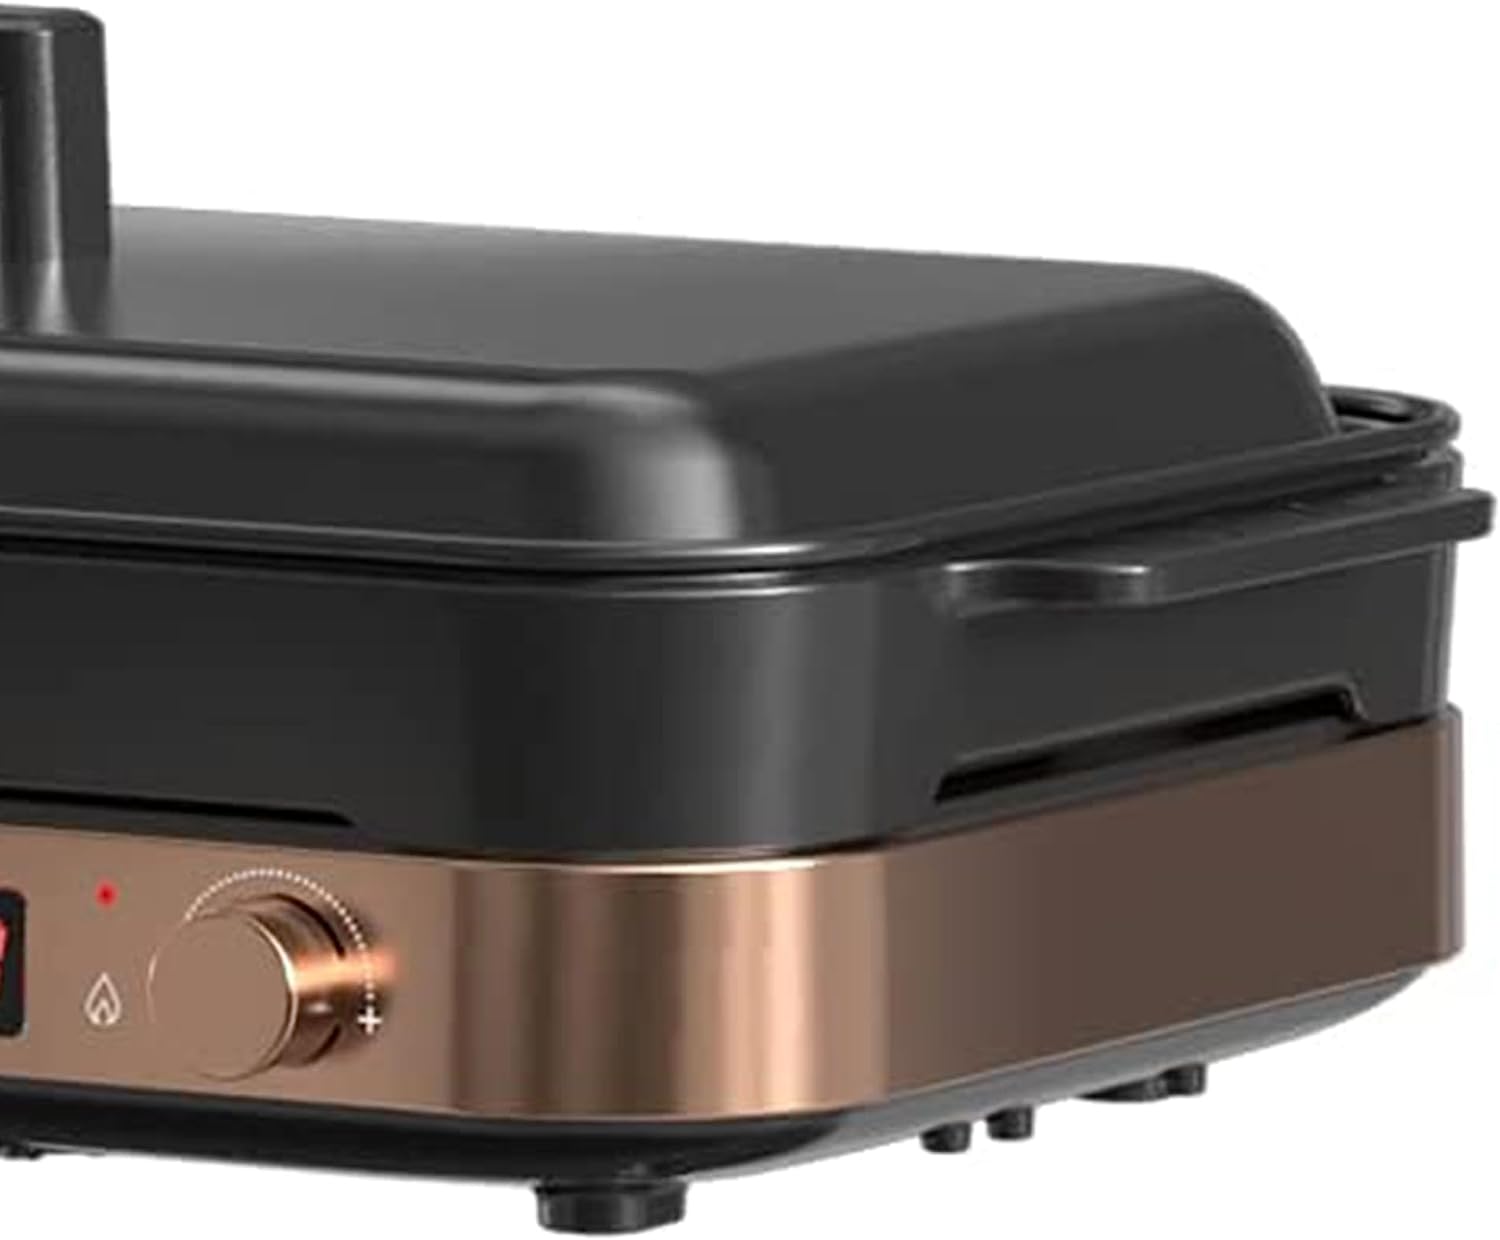 https://bigbigmart.com/wp-content/uploads/2023/07/COOKTRON-Portable-Compact-2-Burner-Induction-Cooktop-Electric-Stove-w-Smokeless-Cast-Iron-Griddle-Grill-Temperature-Control-Child-Lock-Rose-Gold2.jpg